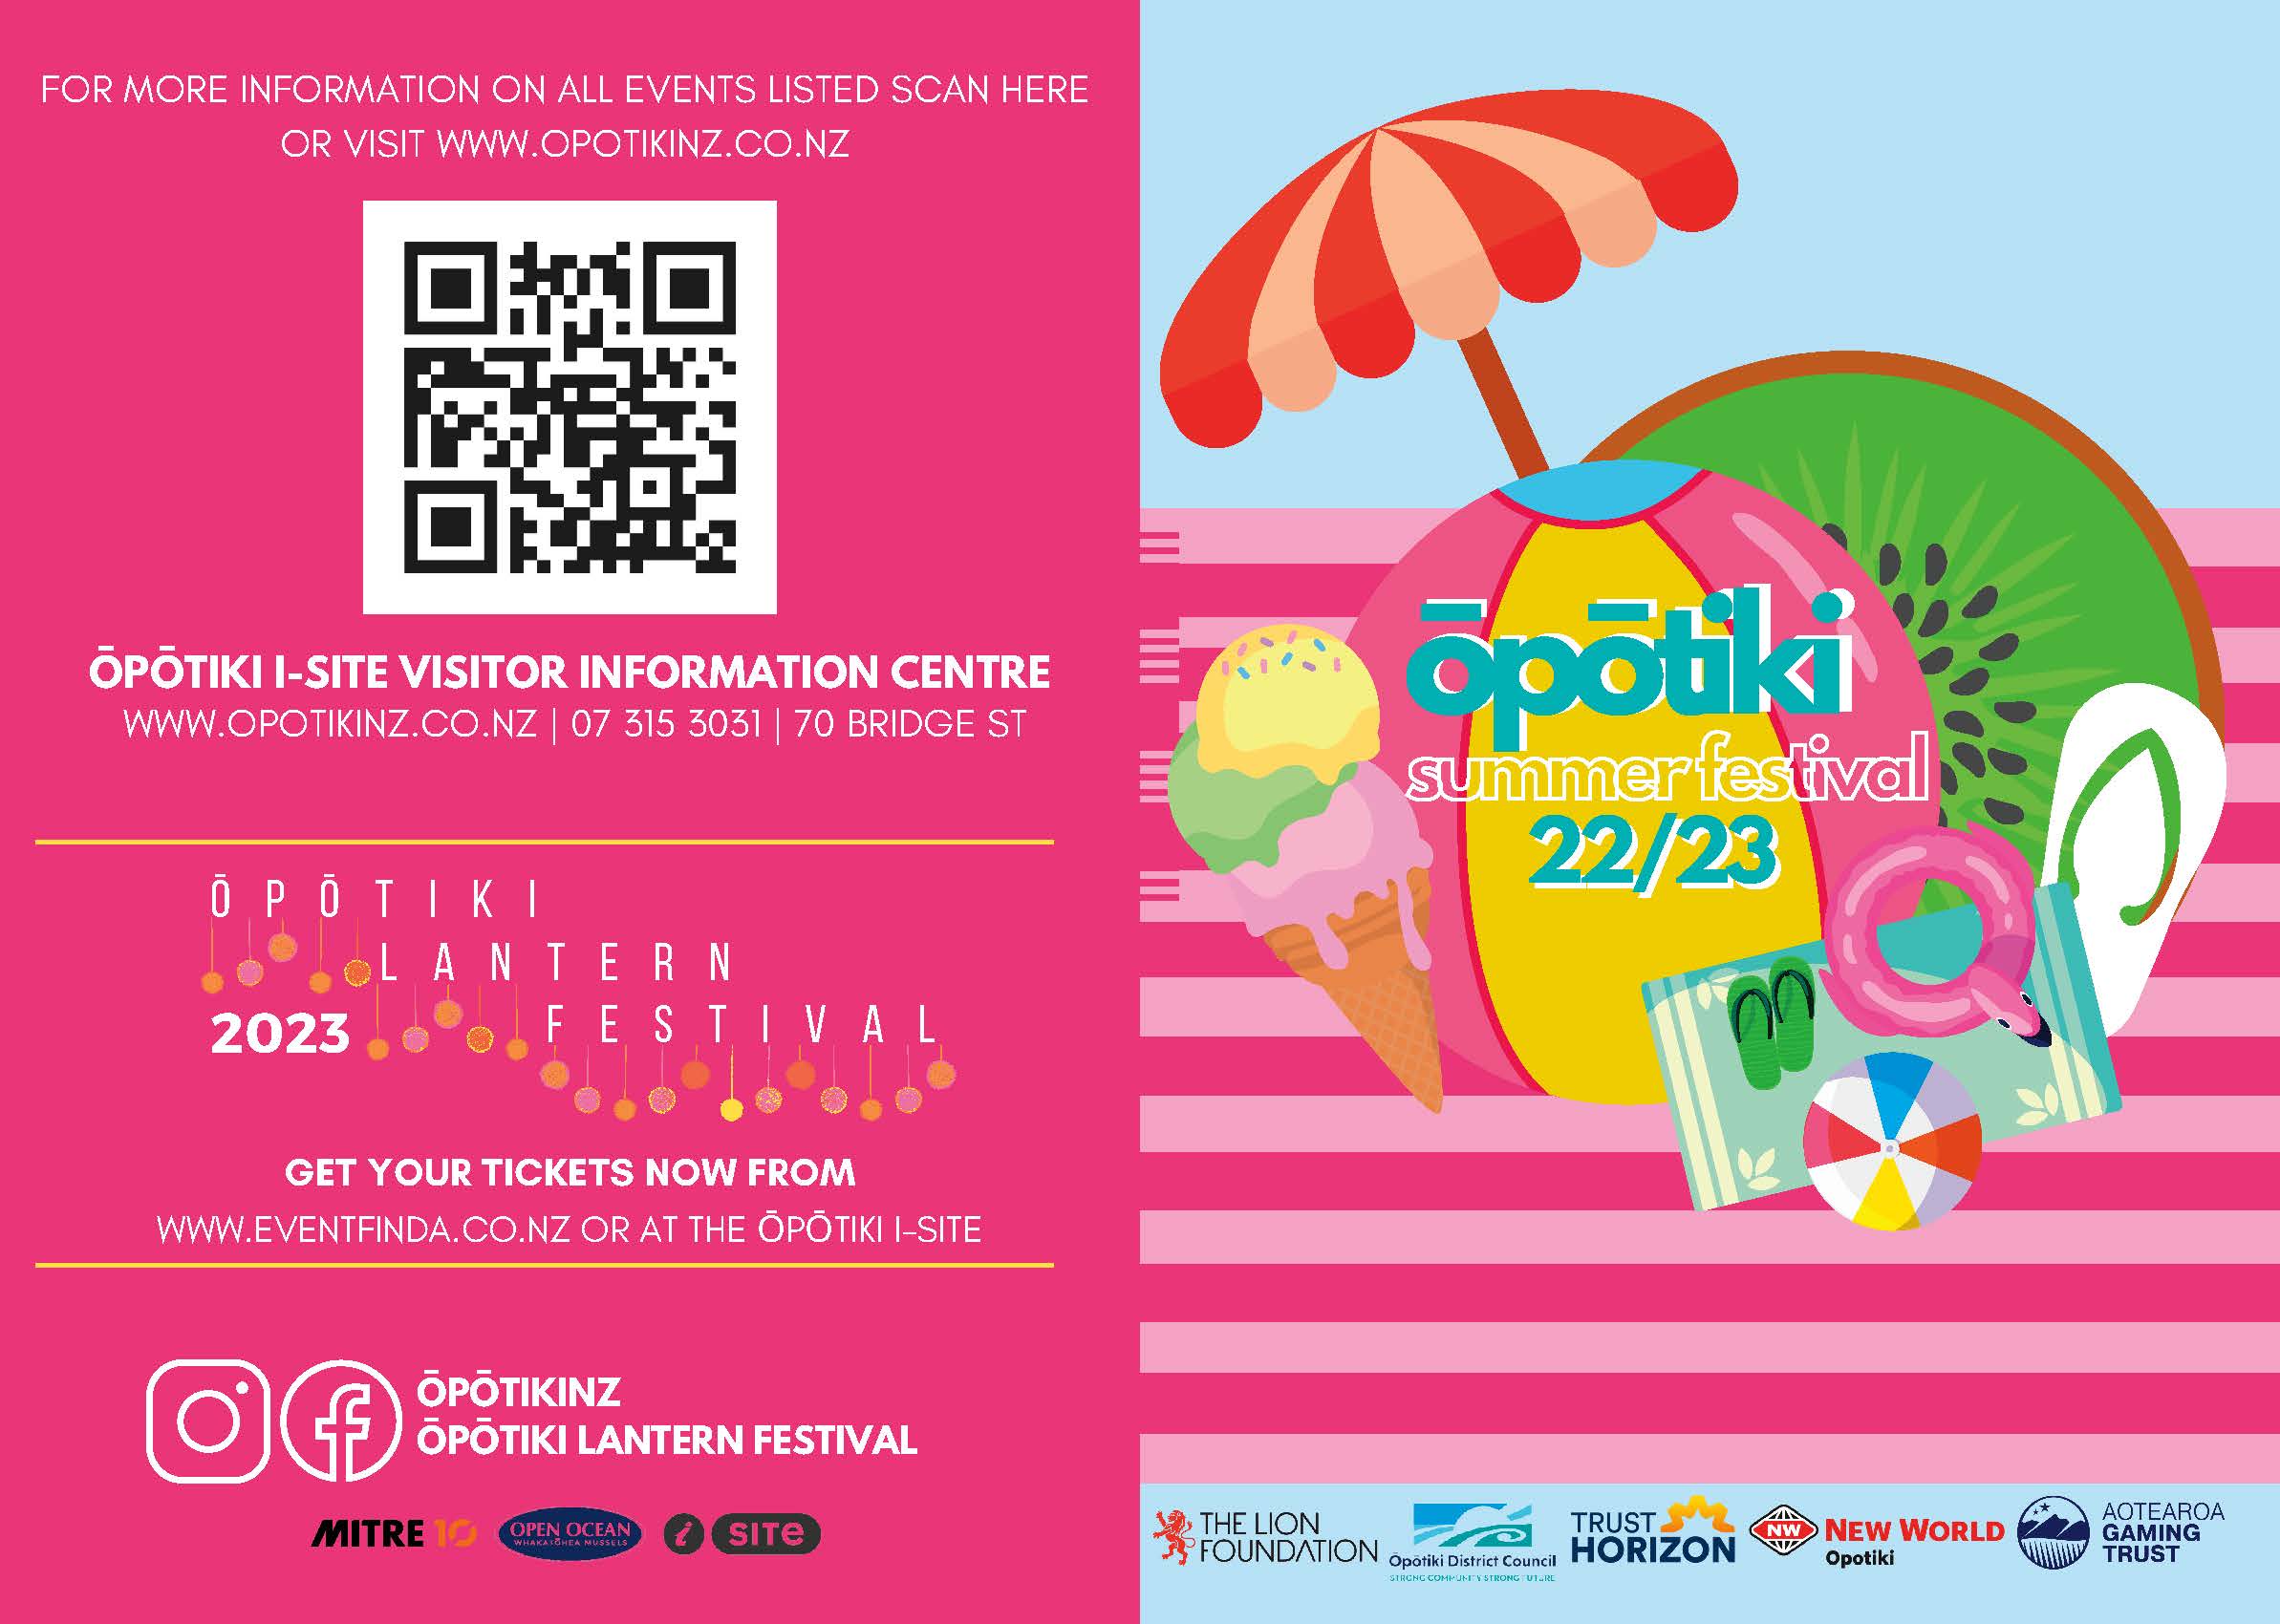 Images of an umbrella, inflatable beach toys, jandels and an ice cream on a pink background with words Opotiki Summer Festival 22/23. Includes logos for sponsors and futher information about the Lantern Festival.